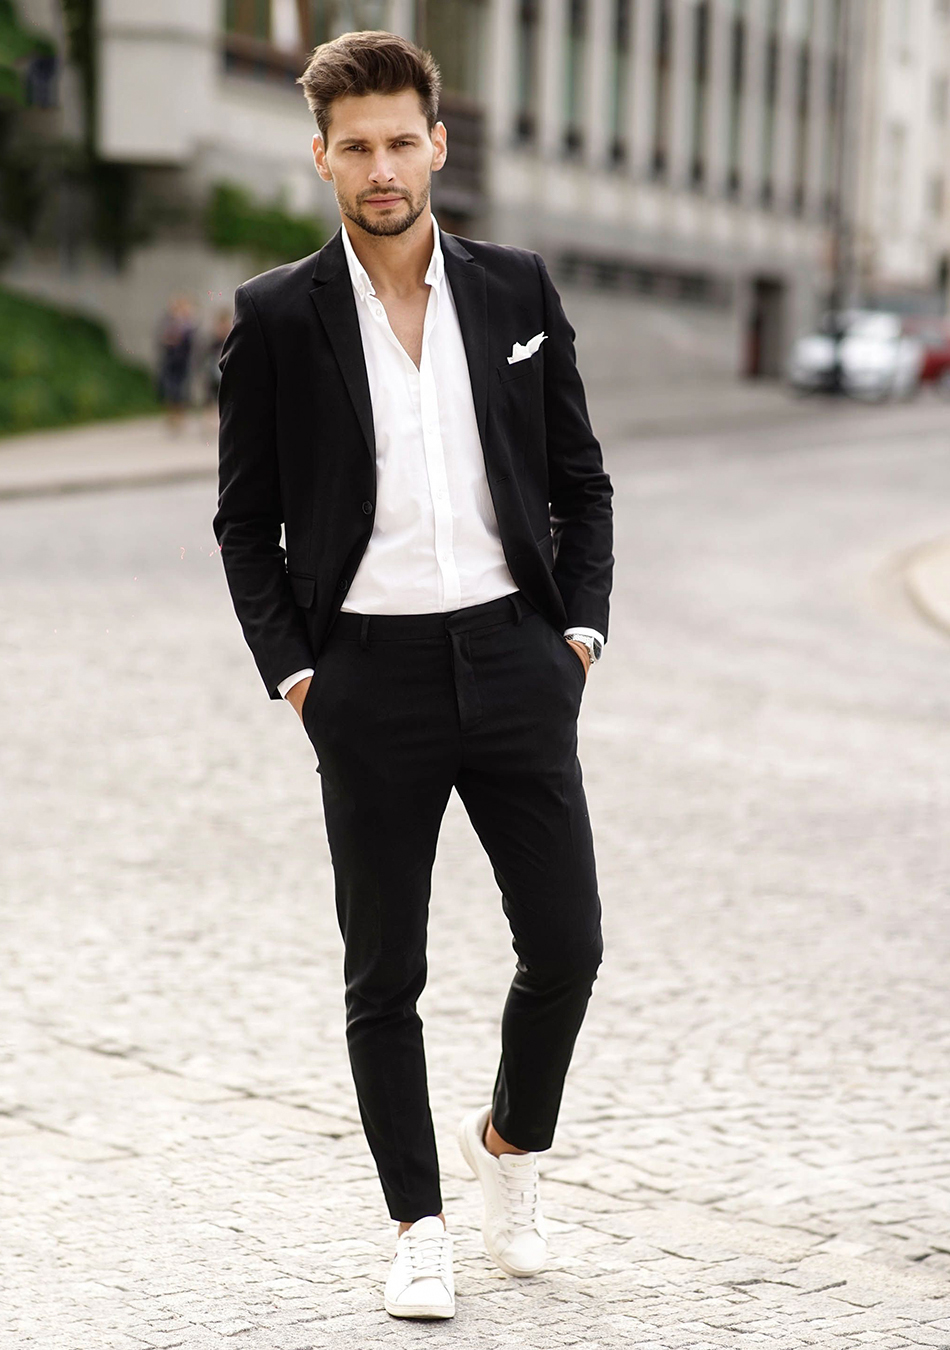 Black suit, white dress shirt, and white sneakers